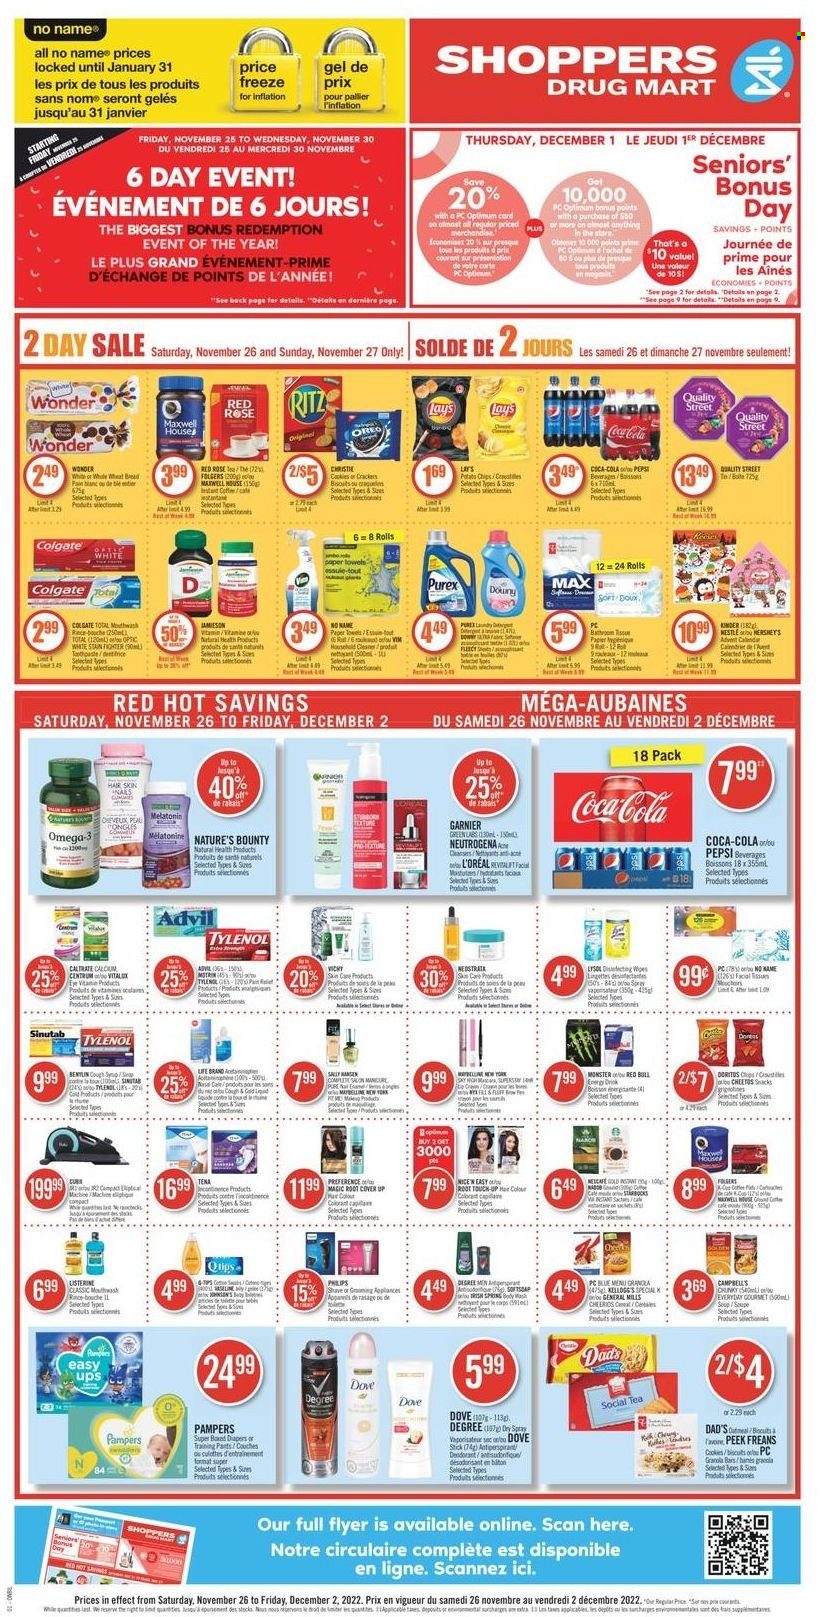 thumbnail - Shoppers Drug Mart Flyer - November 26, 2022 - December 02, 2022 - Sales products - Philips, No Name, advent calendar, Hershey's, cookies, Dove, snack, crackers, Kellogg's, RITZ, Doritos, potato chips, Cheetos, chips, Lay’s, granola bar, Coca-Cola, Pepsi, energy drink, Monster, Red Bull, Maxwell House, tea, coffee, Folgers, pants, nappies, baby pants, kitchen towels, paper towels, cleaner, Lysol, Purex, body wash, Vichy, Vaseline, mouthwash, L’Oréal, anti-perspirant, manicure, Maybelline, cup, Optimum, Melatonin, Nature's Bounty, Tylenol, Omega-3, Advil Rapid, Centrum, Benylin, calcium, detergent, Colgate, Garnier, Listerine, Nestlé, Neutrogena, Sally Hansen, Pampers, Nescafé, deodorant. Page 1.